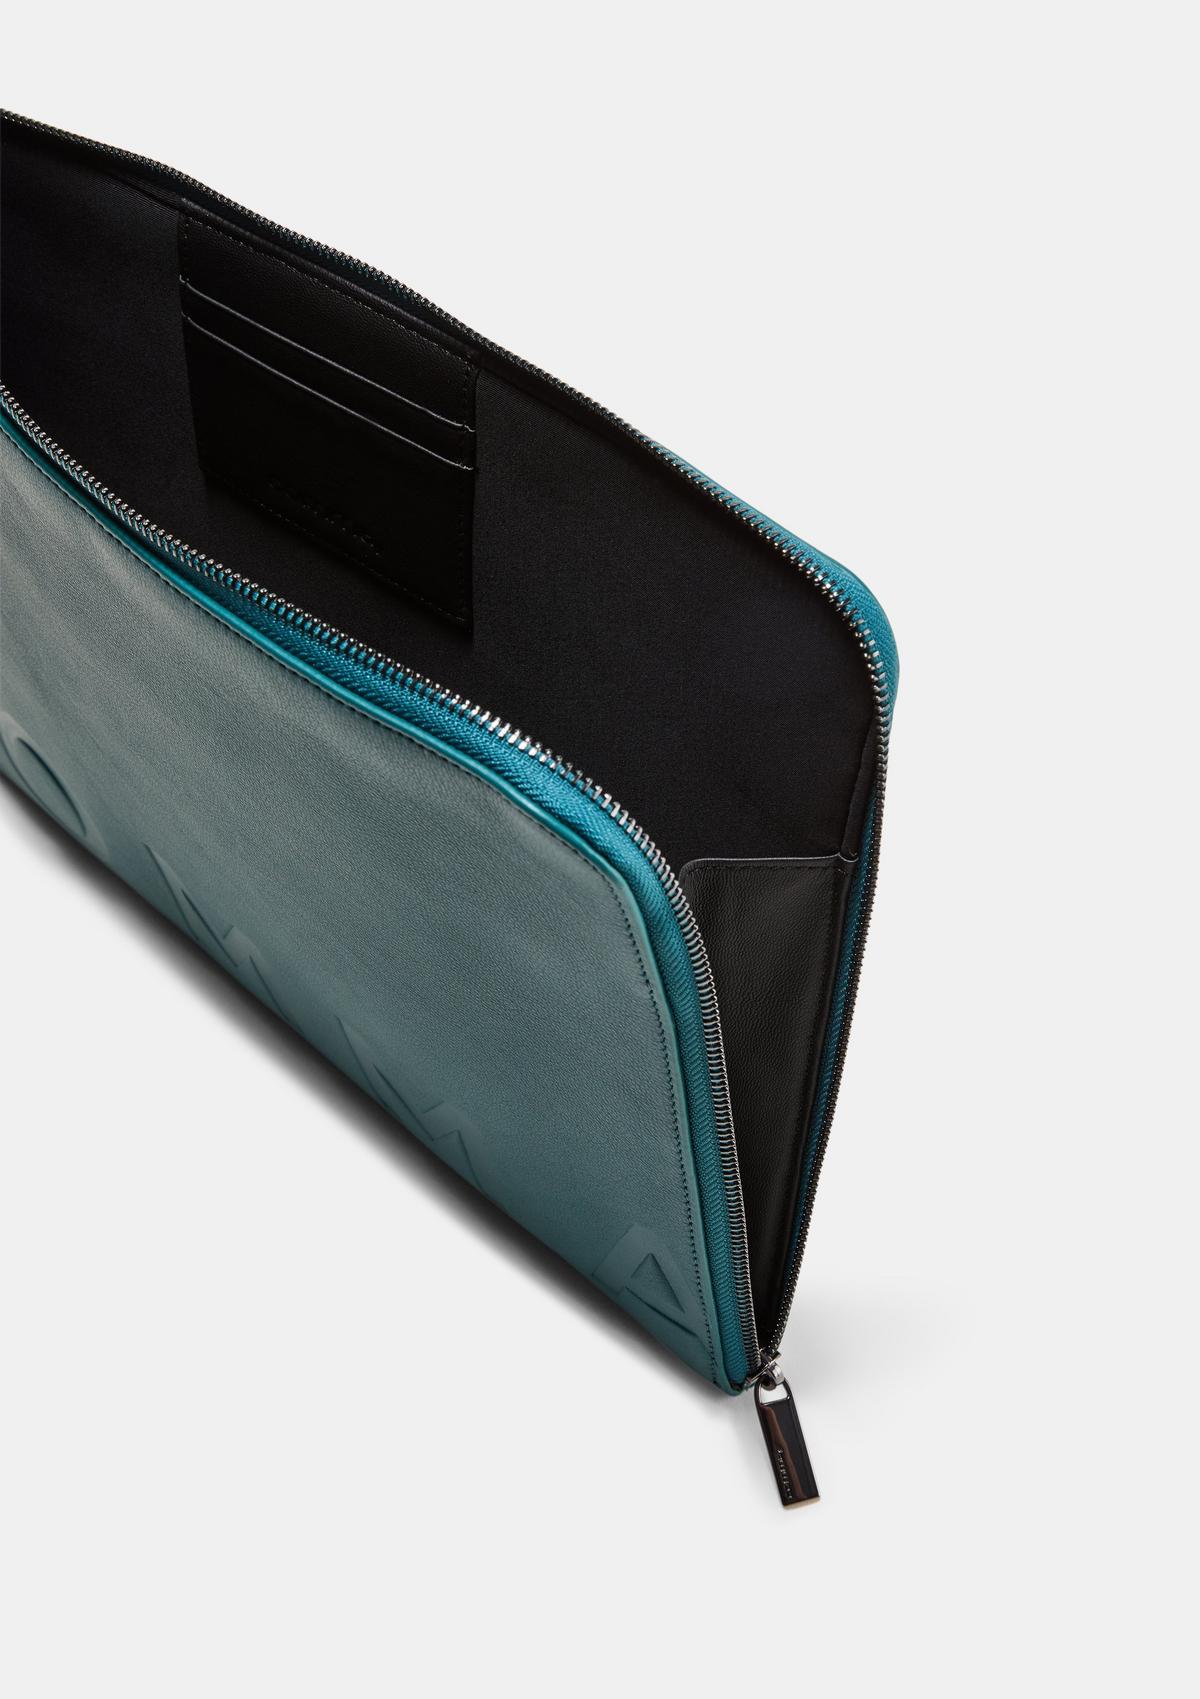 comma High-quality laptop bag made of leather